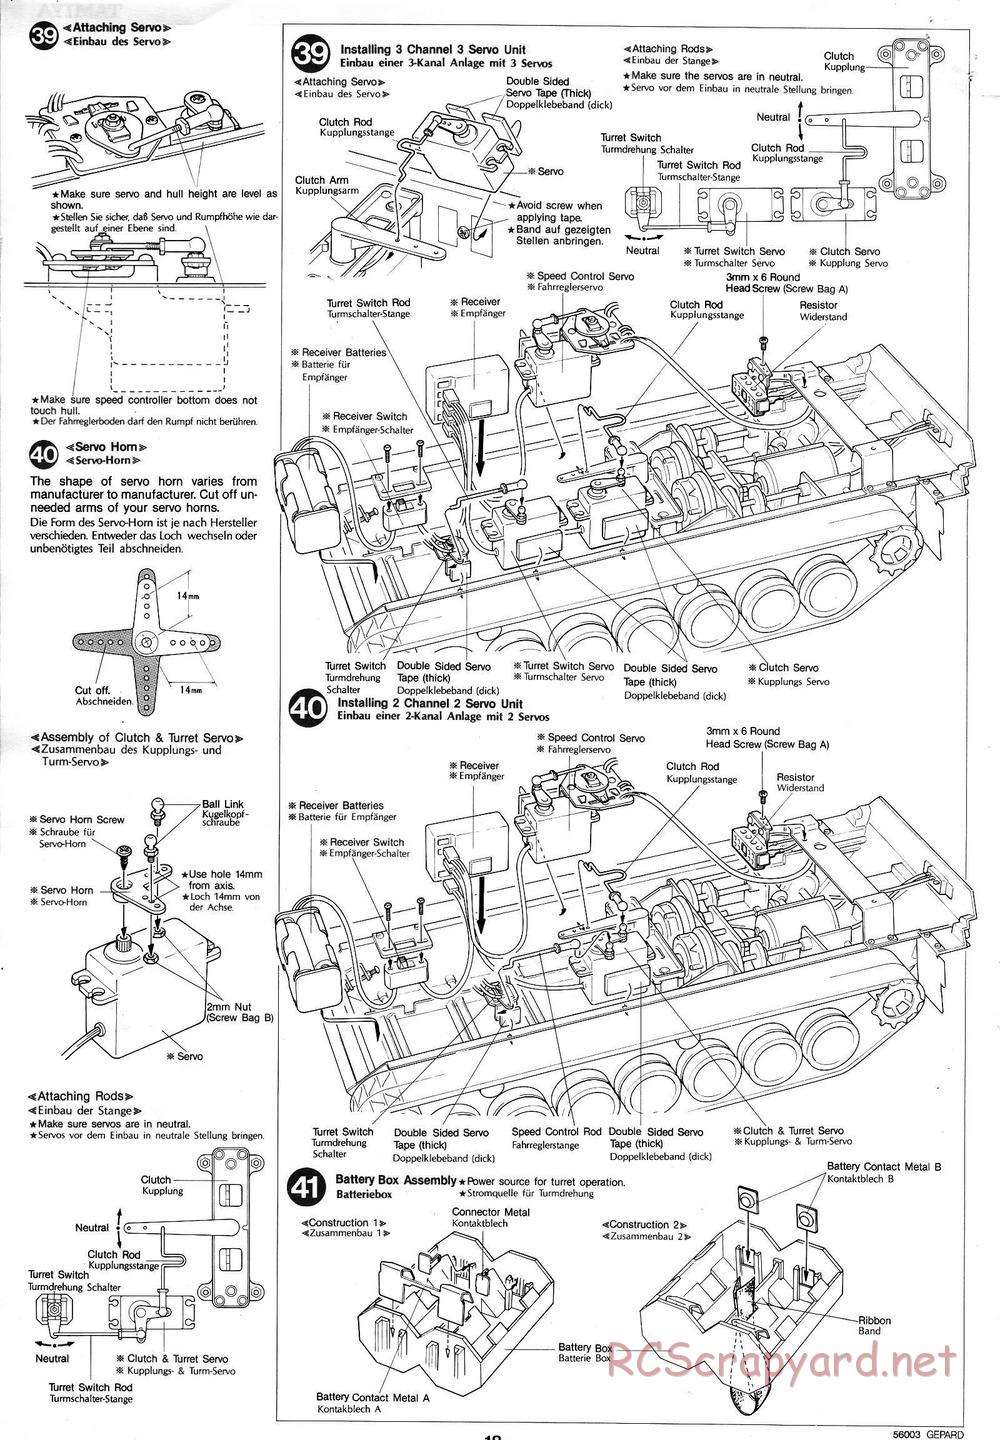 Tamiya - Flakpanzer Gepard - 1/16 Scale Chassis - Manual - Page 18